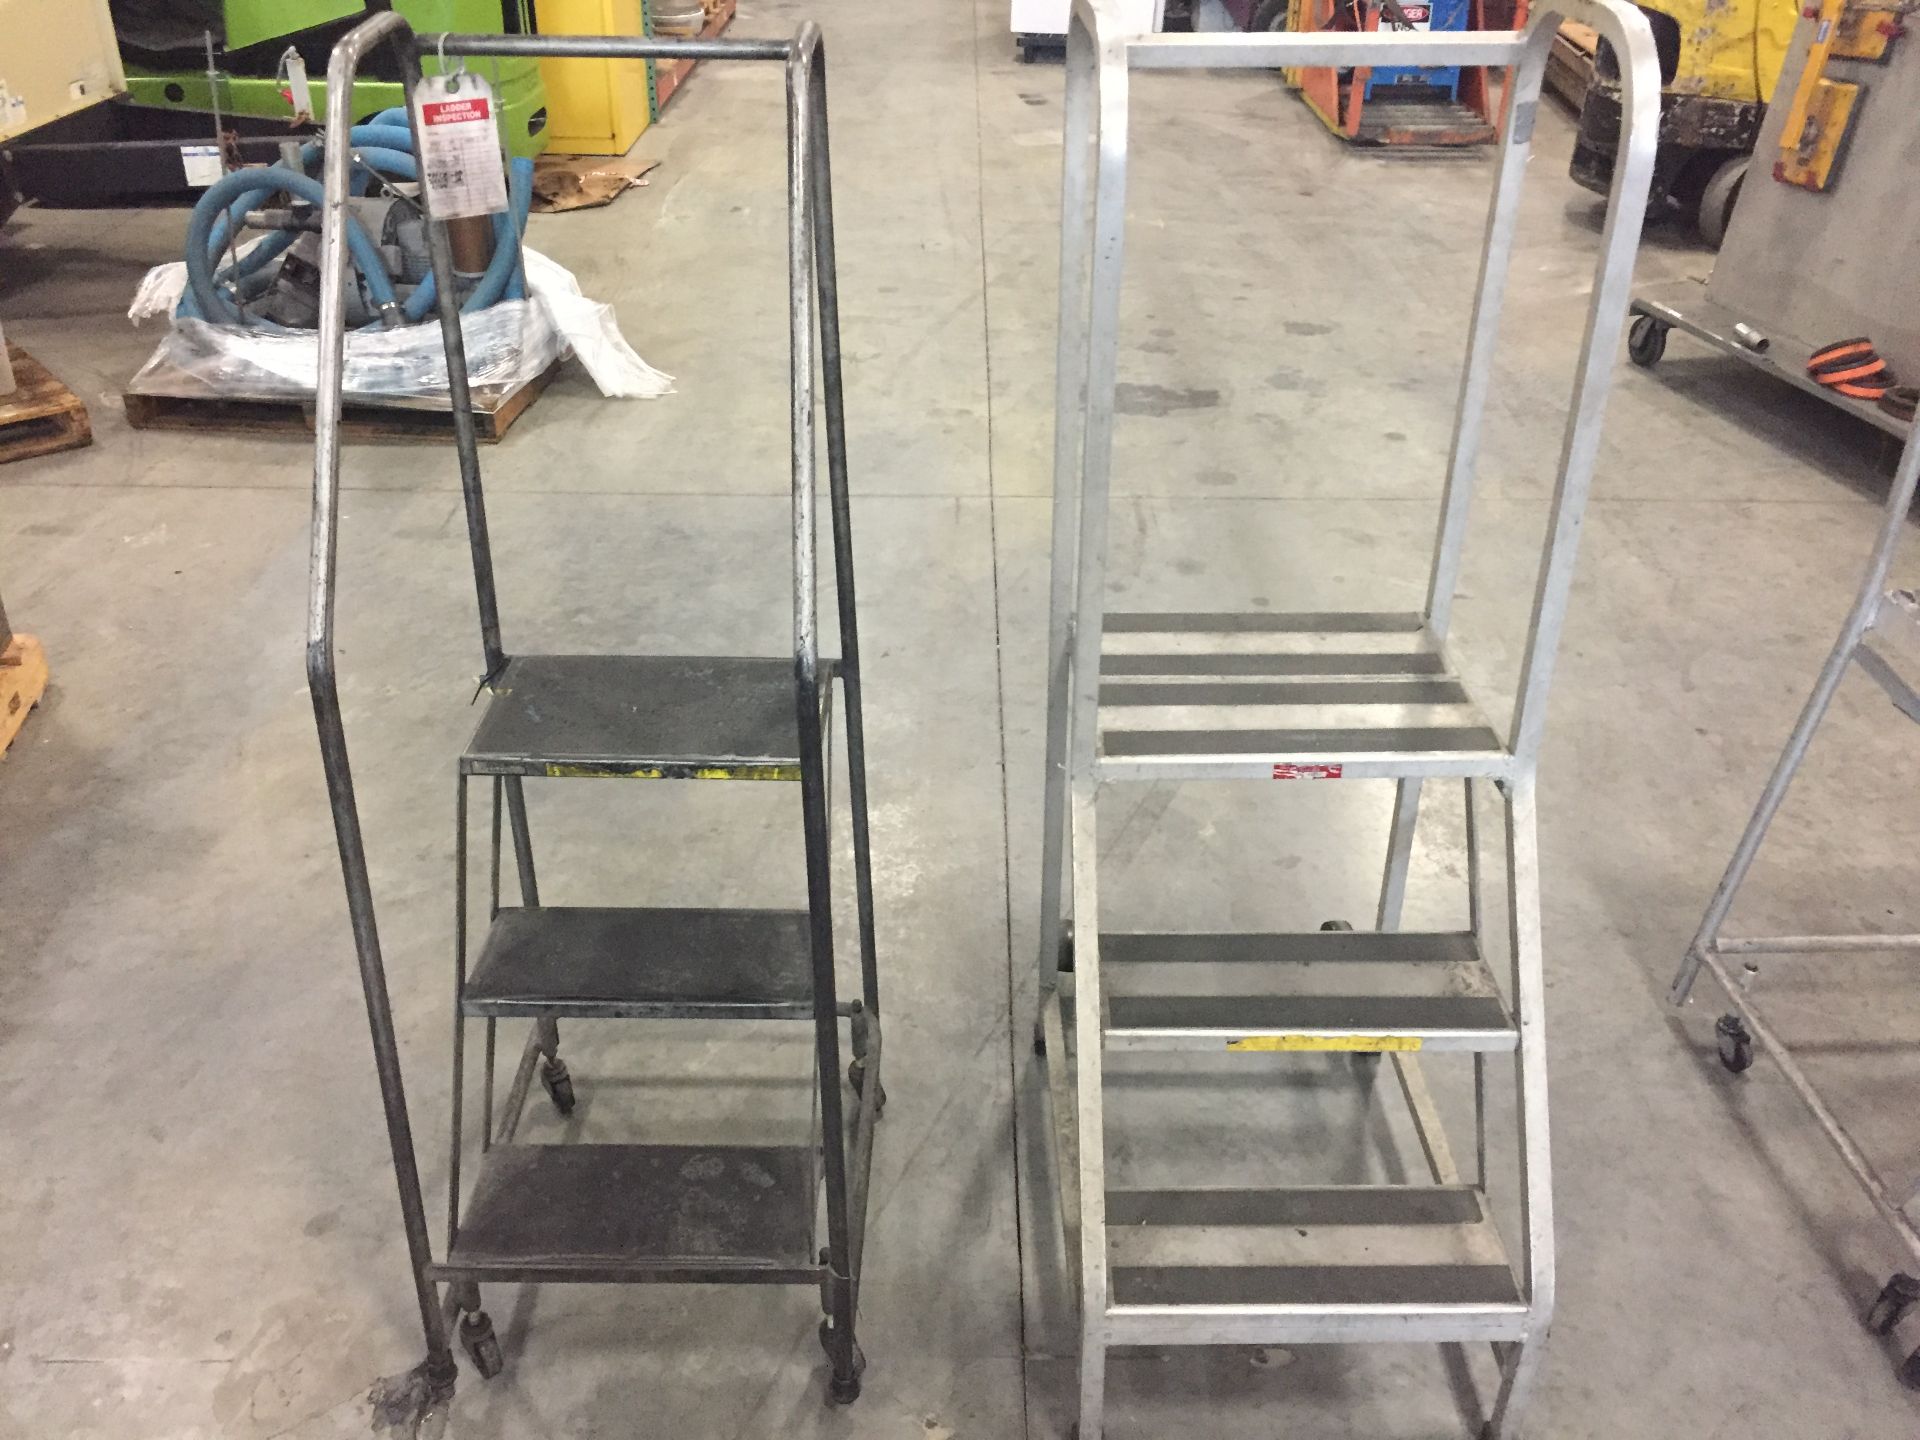 TWO ROLLING STAIR CASES (ONE STEEL, ONE ALUMINUM)